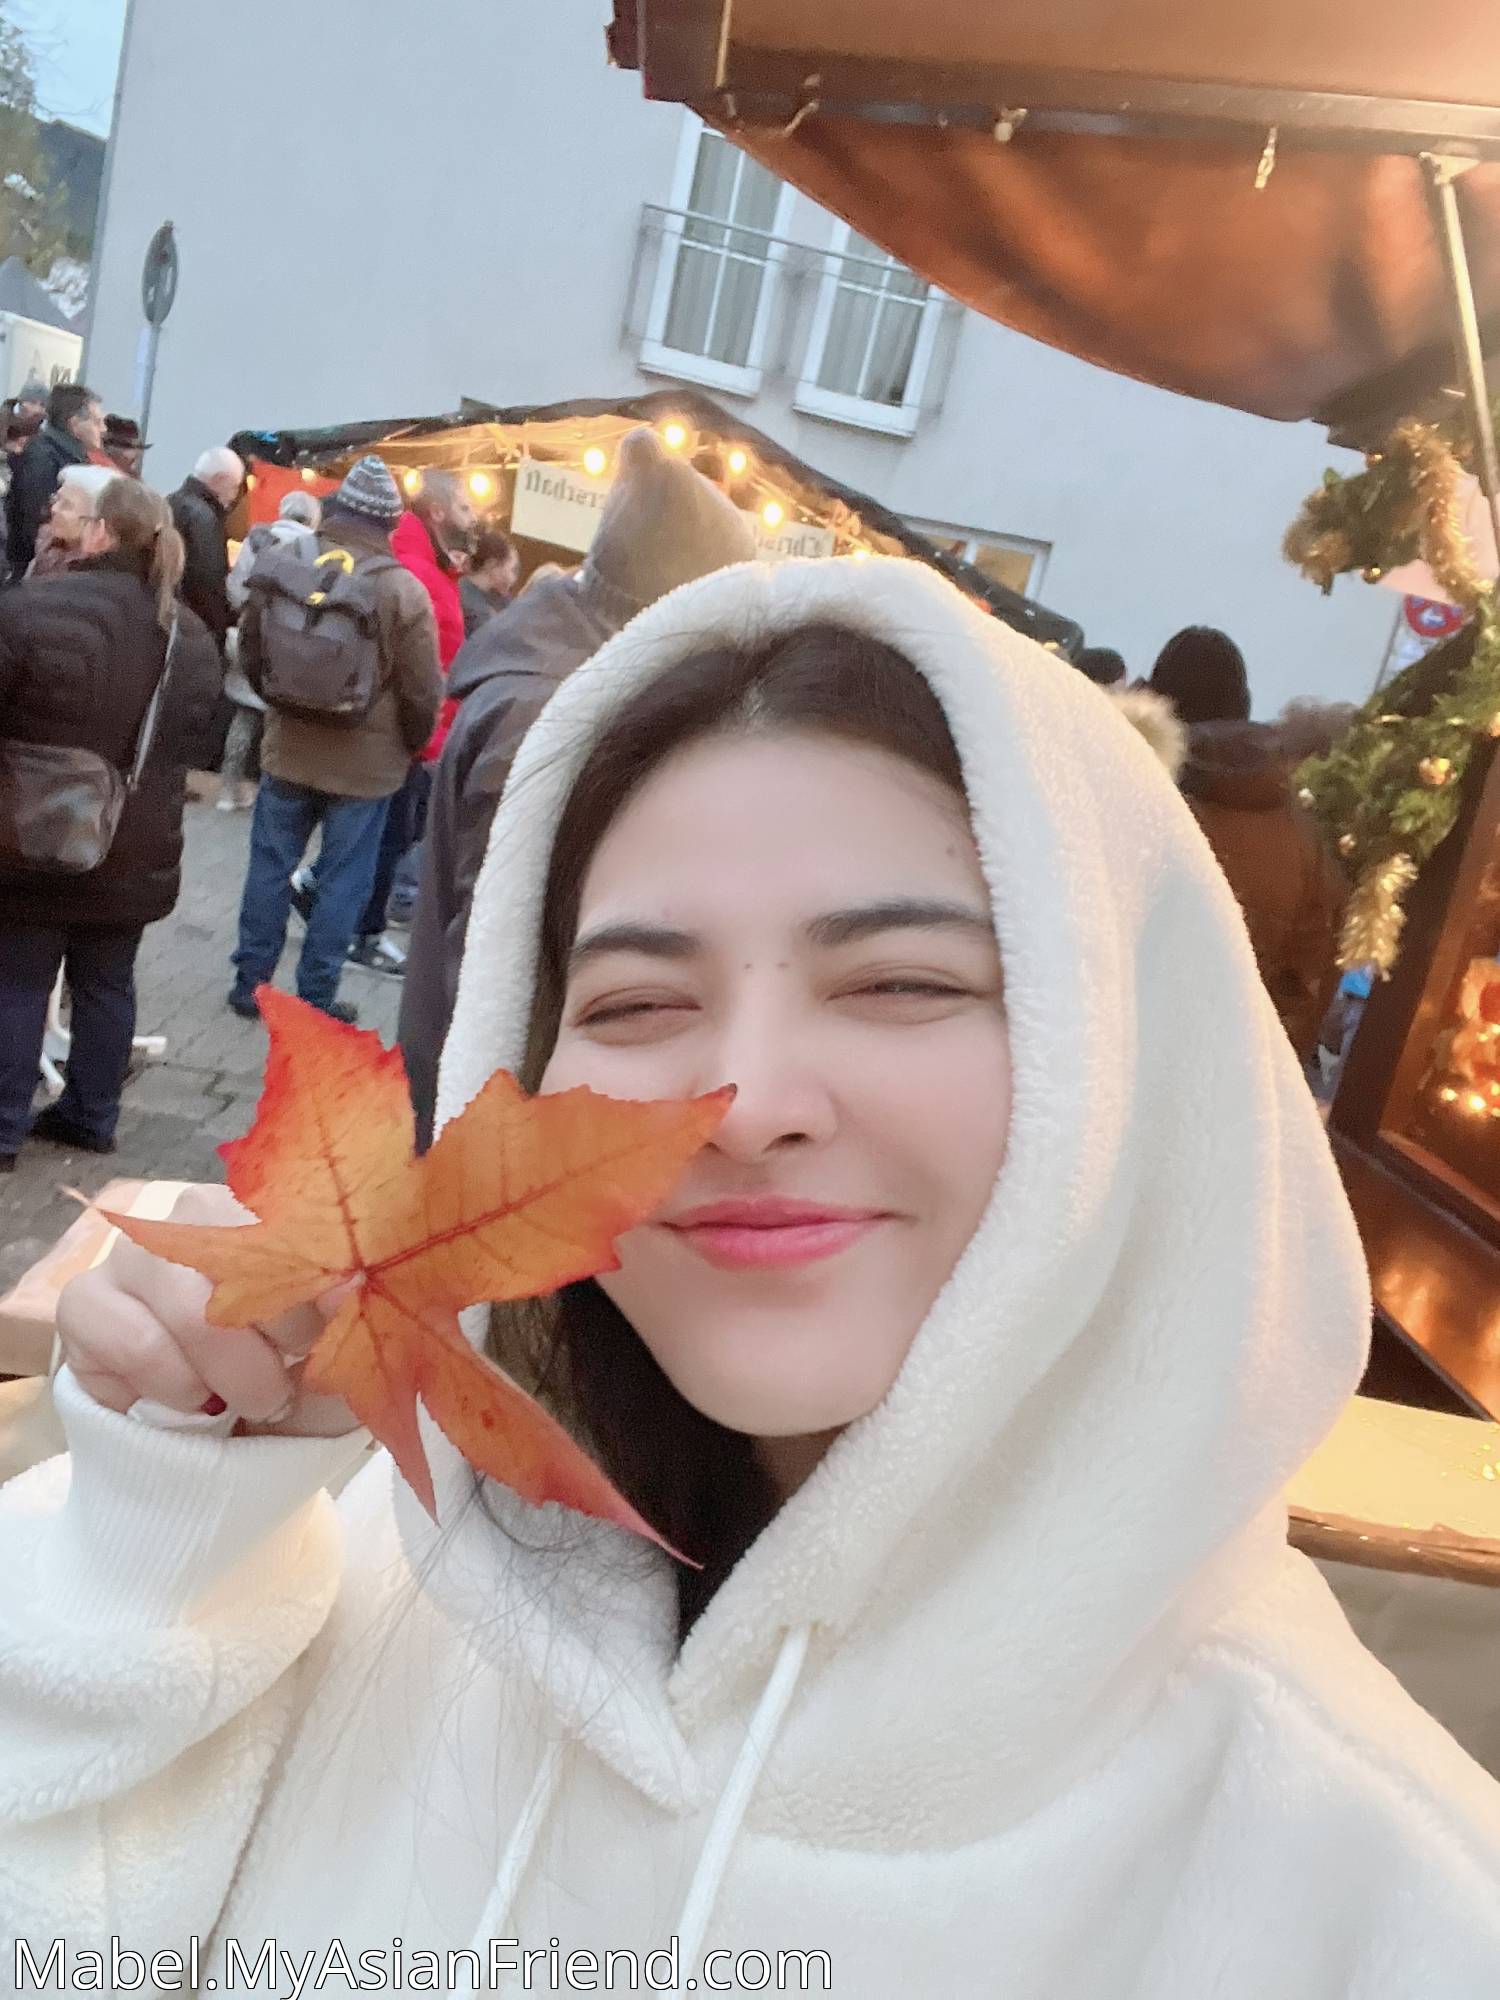 Mabel's personal blog photo 1 added Monday the 28th of November 2022